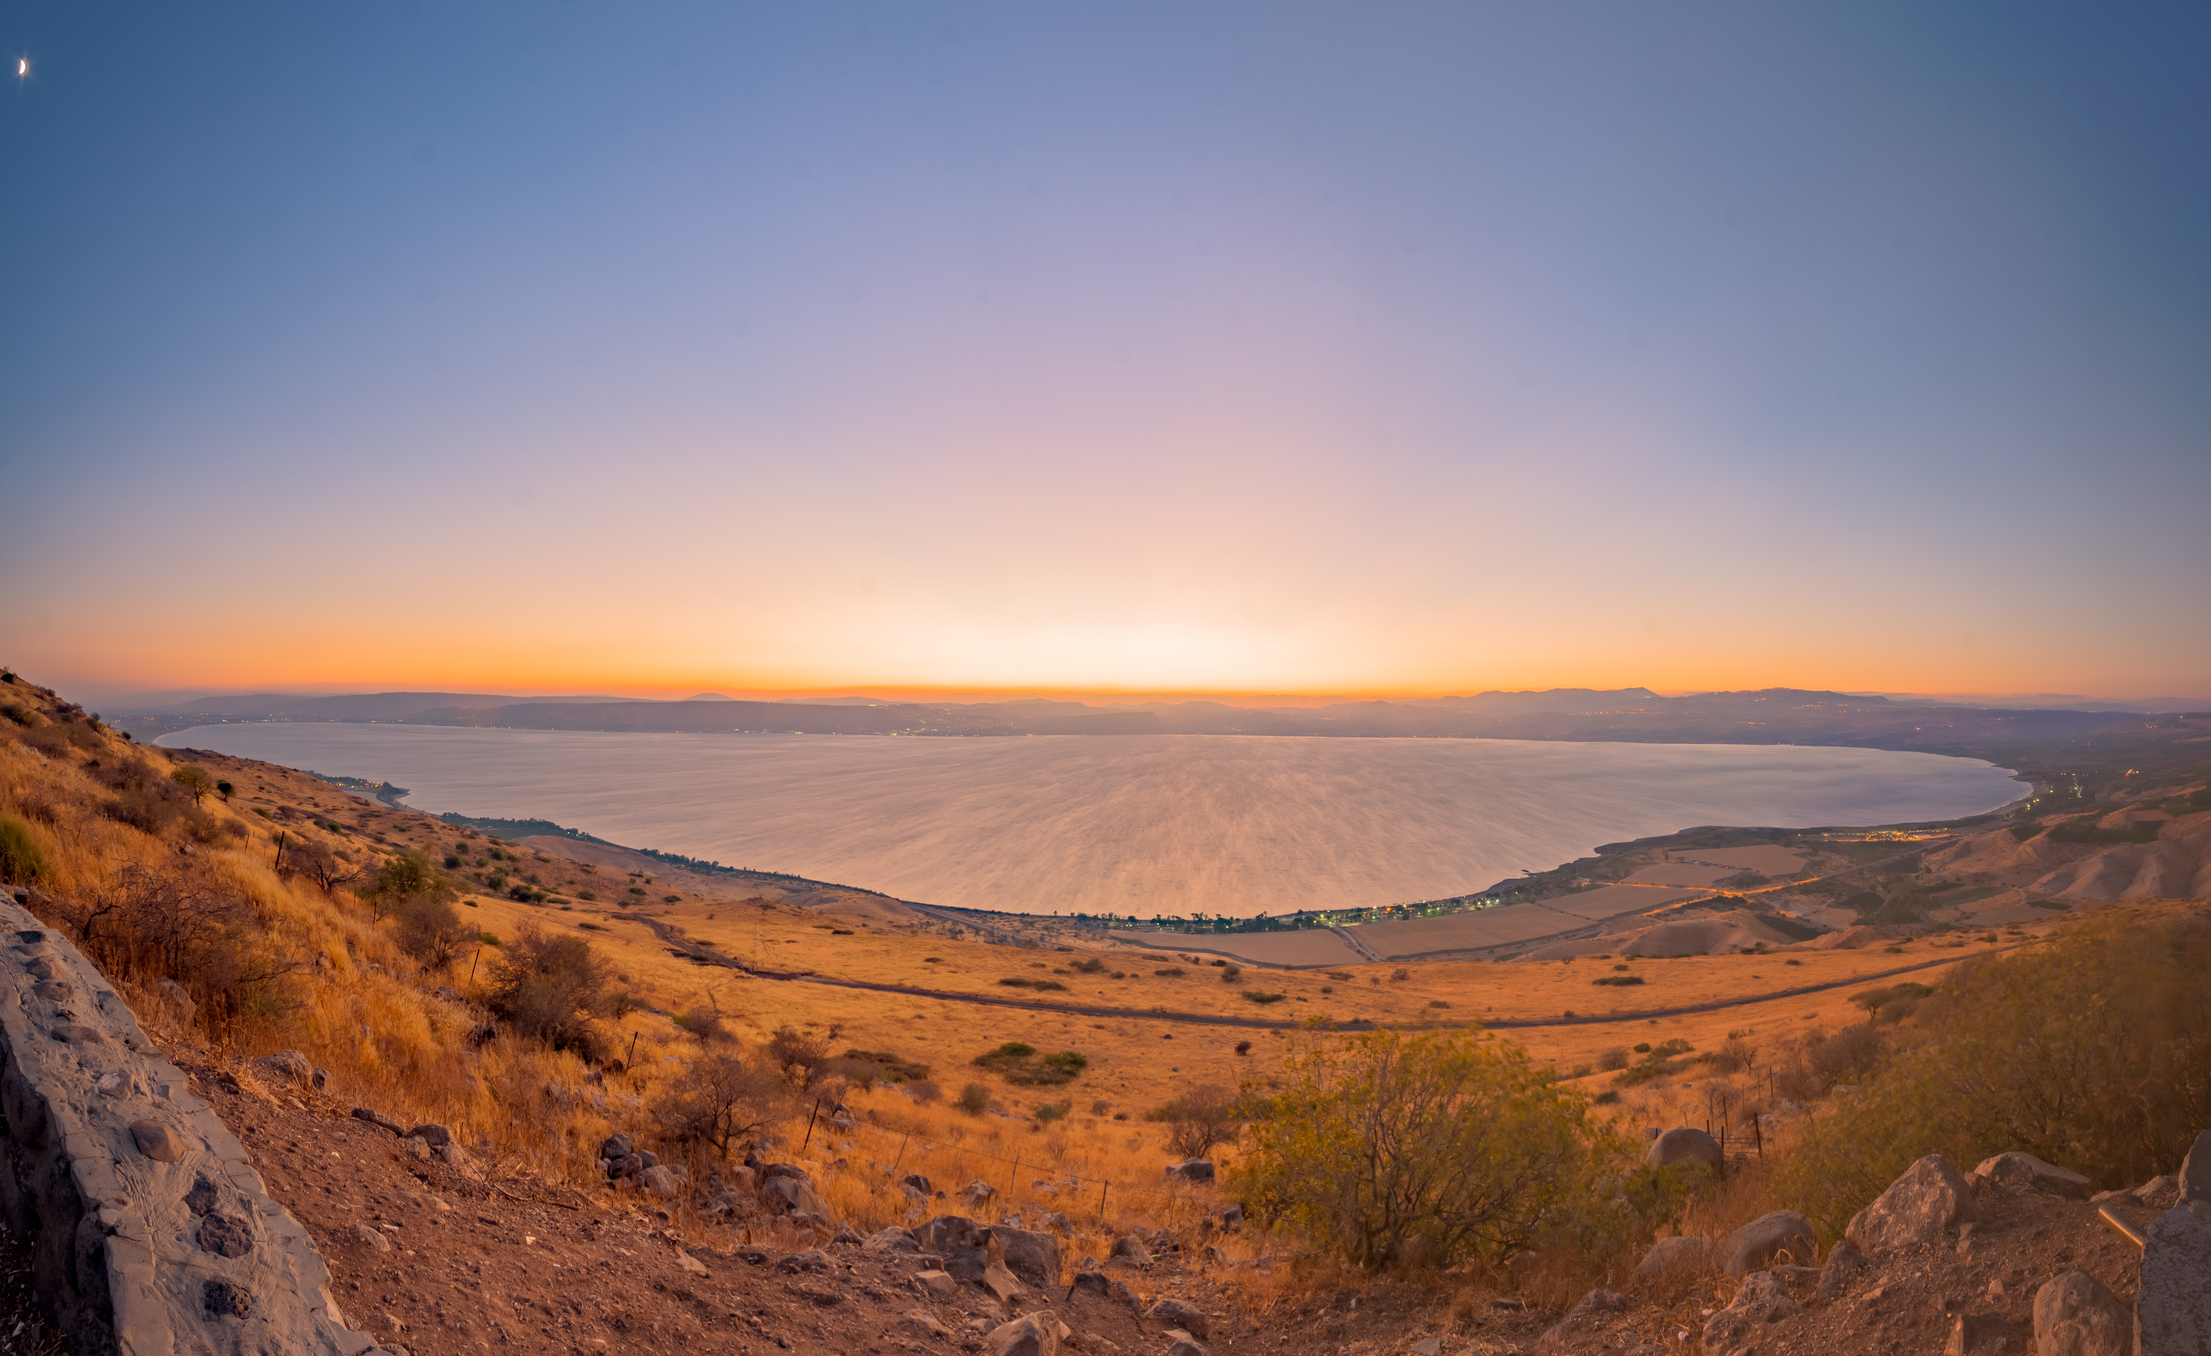 Laurent Levy purchased a 25-acre plot to develop between 800 and 1000 guestrooms on Lake Kinneret in Israel